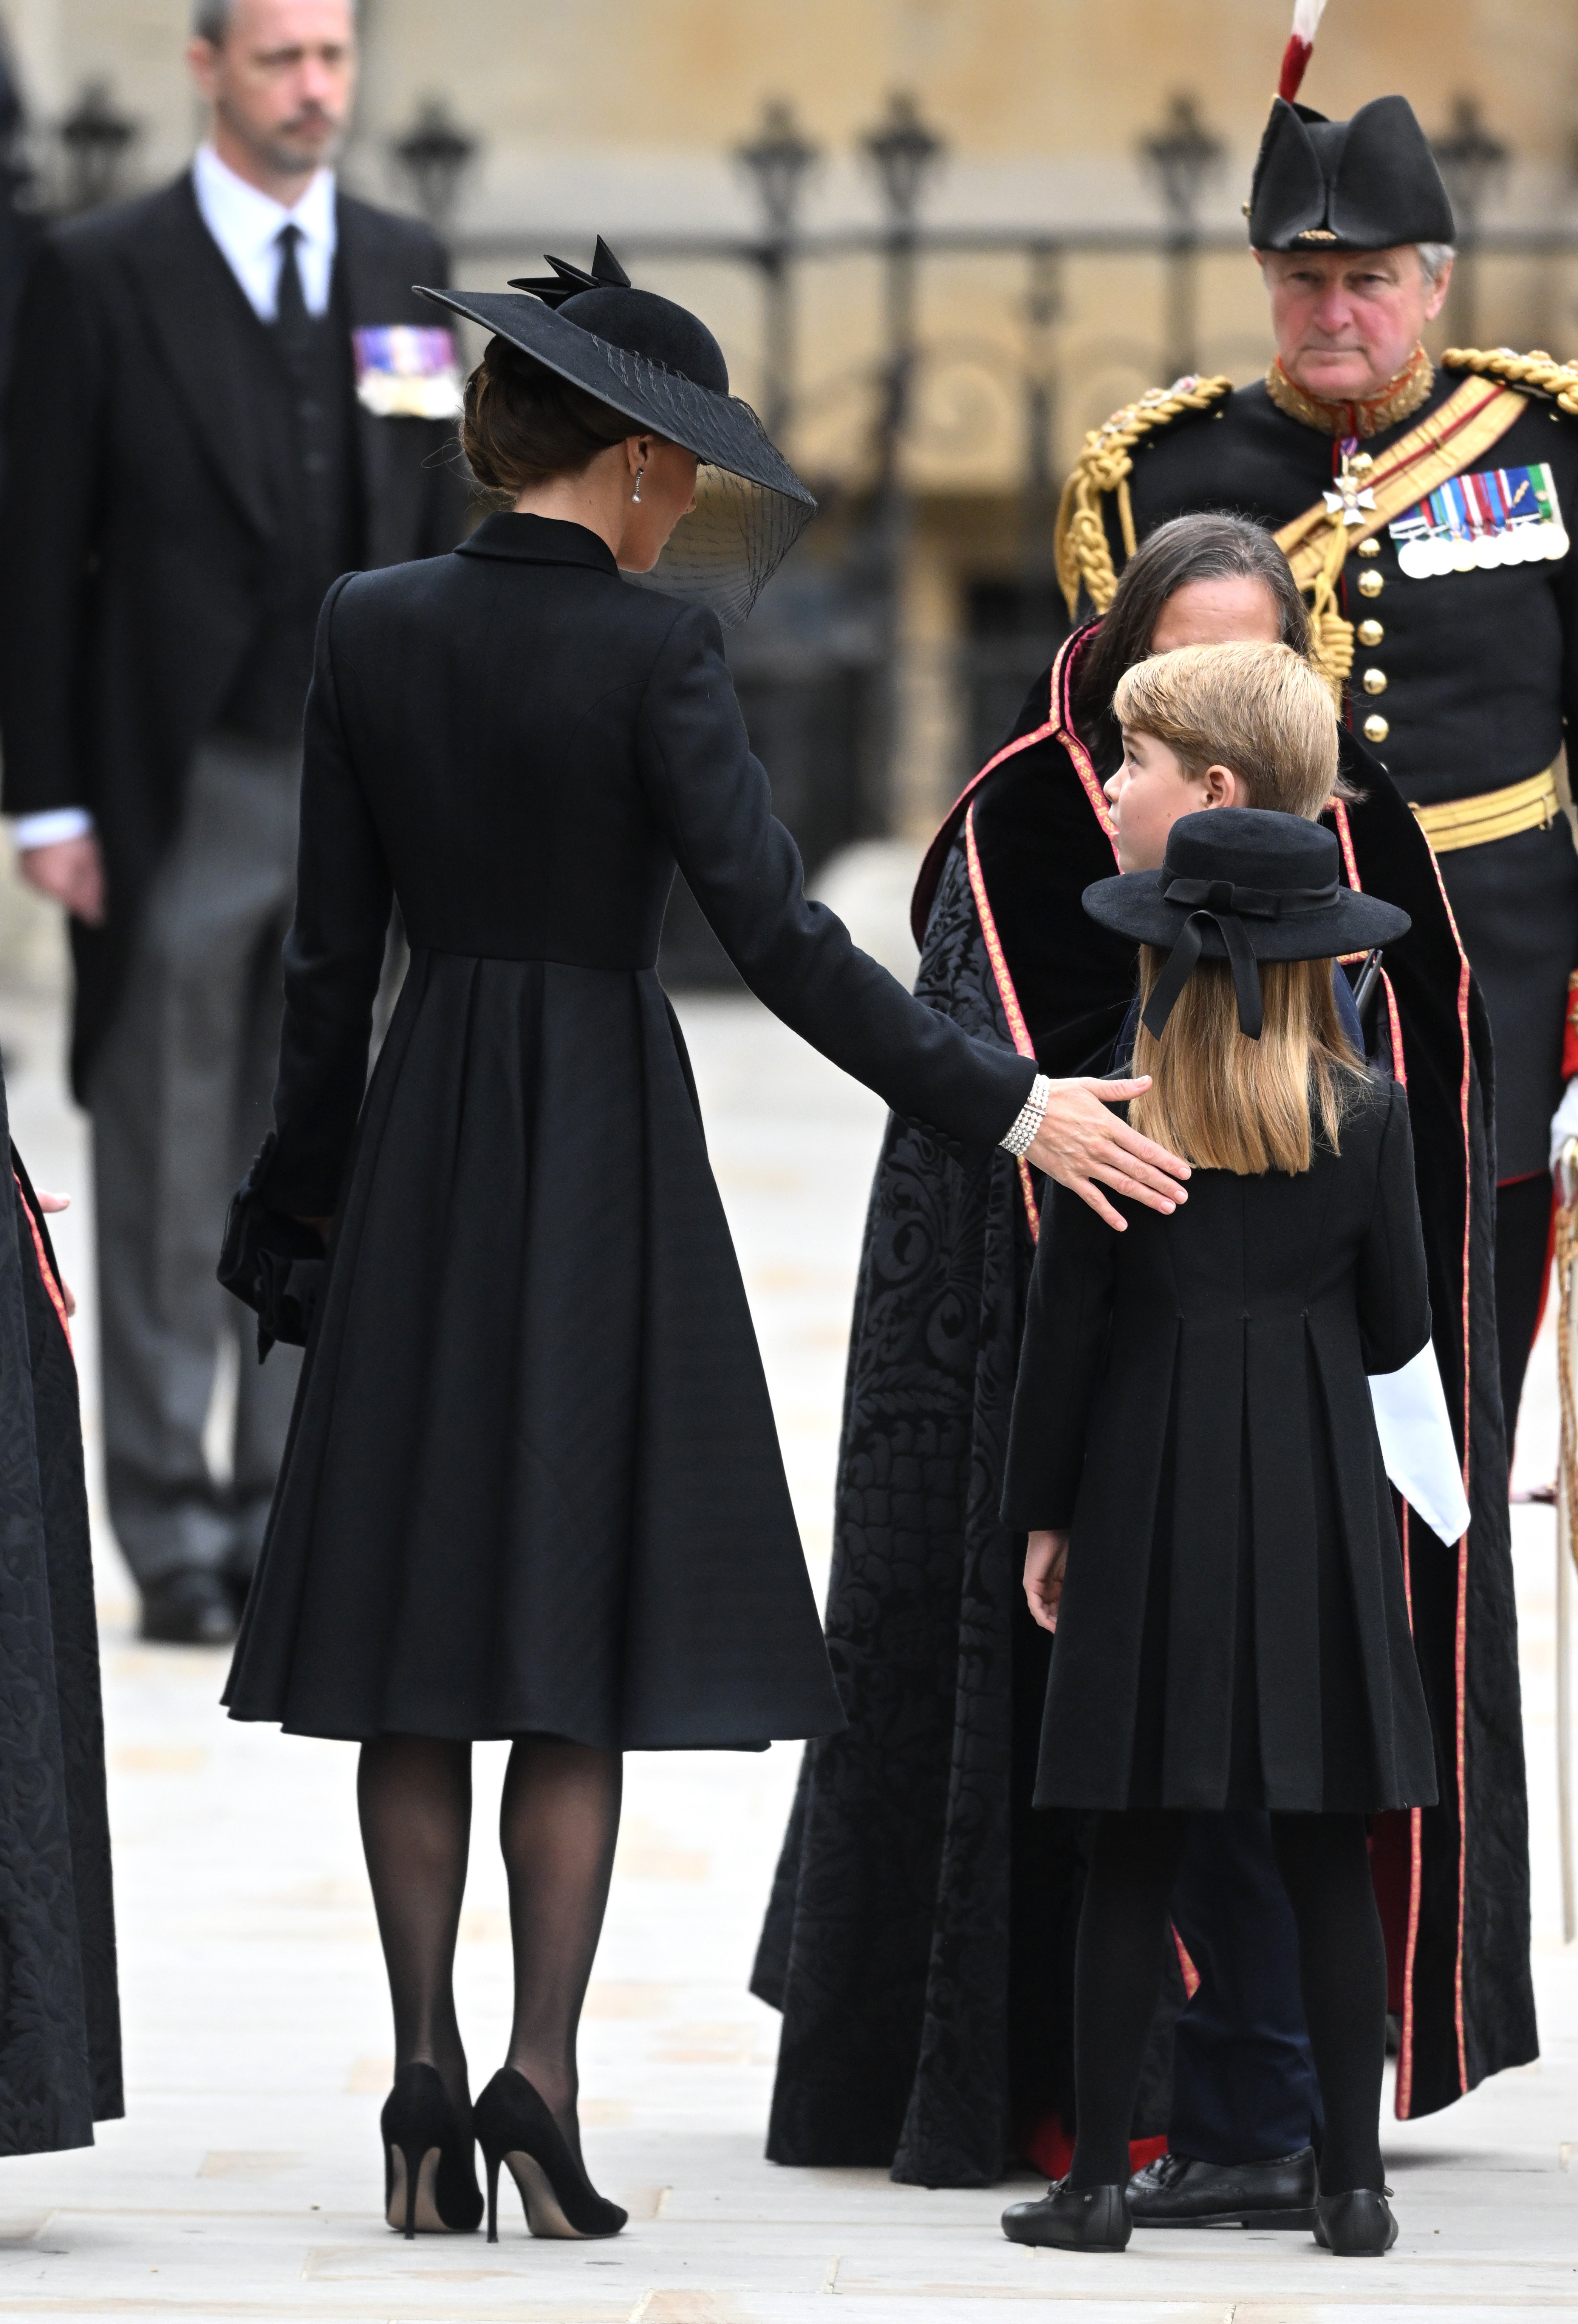 The Princess of Wales puts her hand on Princess Charlotte's shoulder outside the Queen's funeral at Westminster Abbey.